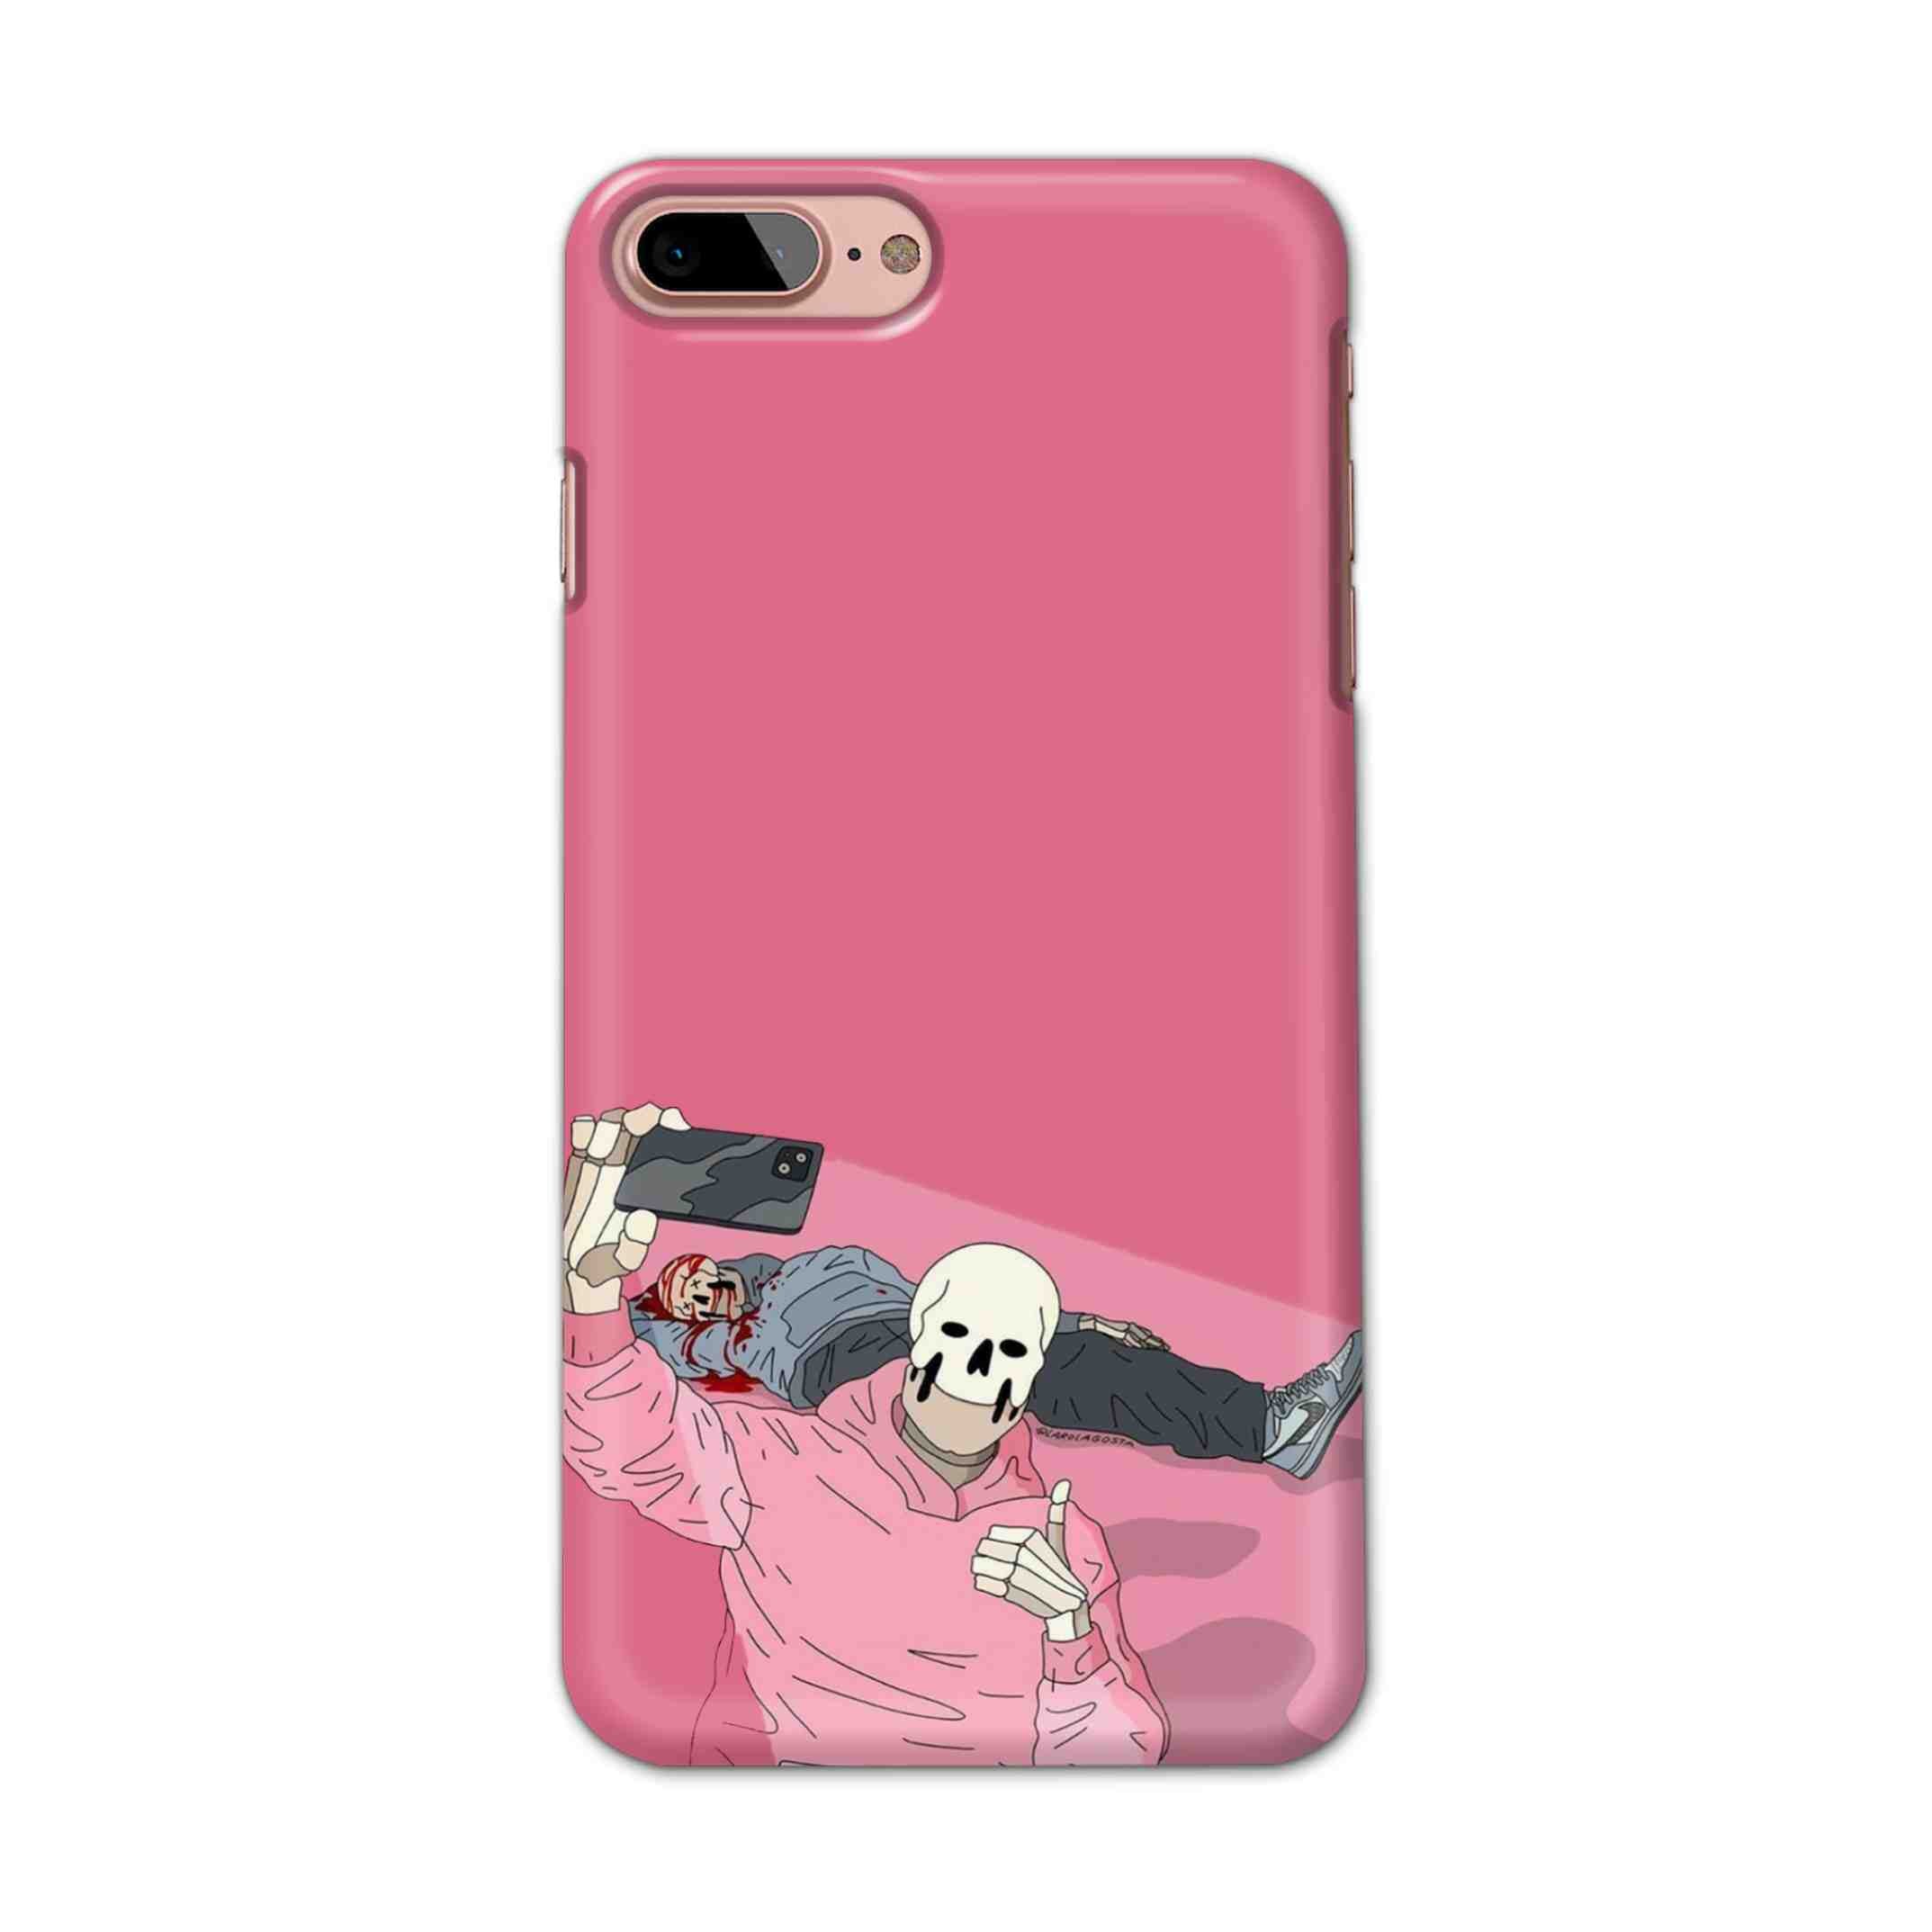 Buy Selfie Hard Back Mobile Phone Case/Cover For iPhone 7 Plus / 8 Plus Online